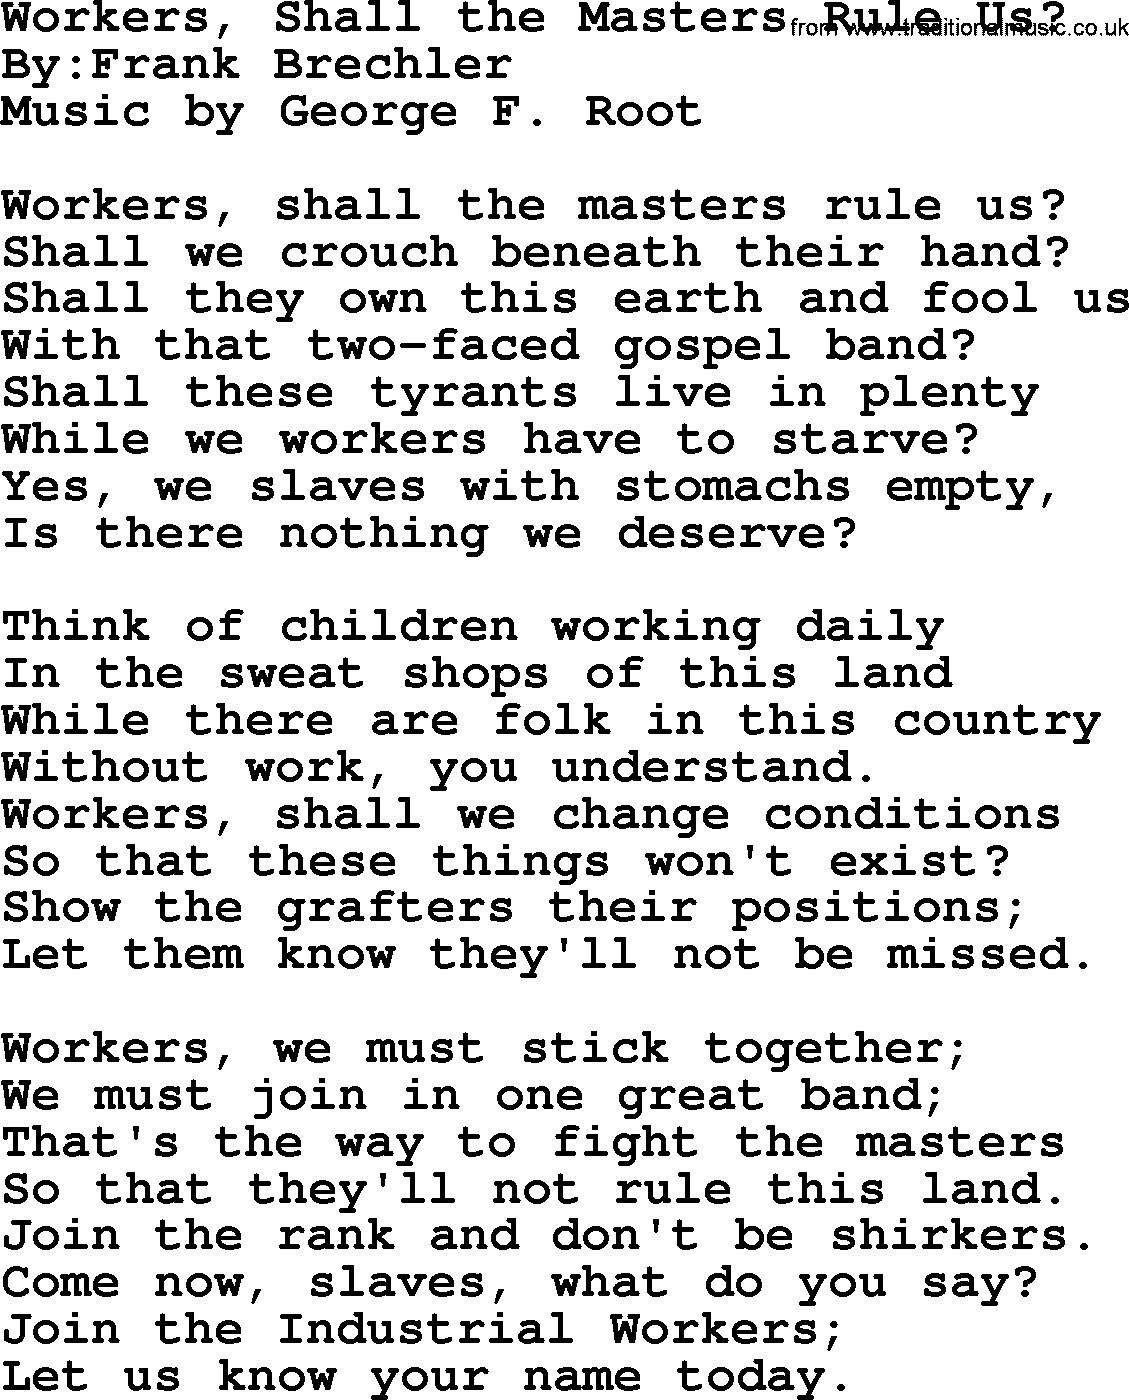 Political, Solidarity, Workers or Union song: Workers Shall The Masters Rule Us, lyrics